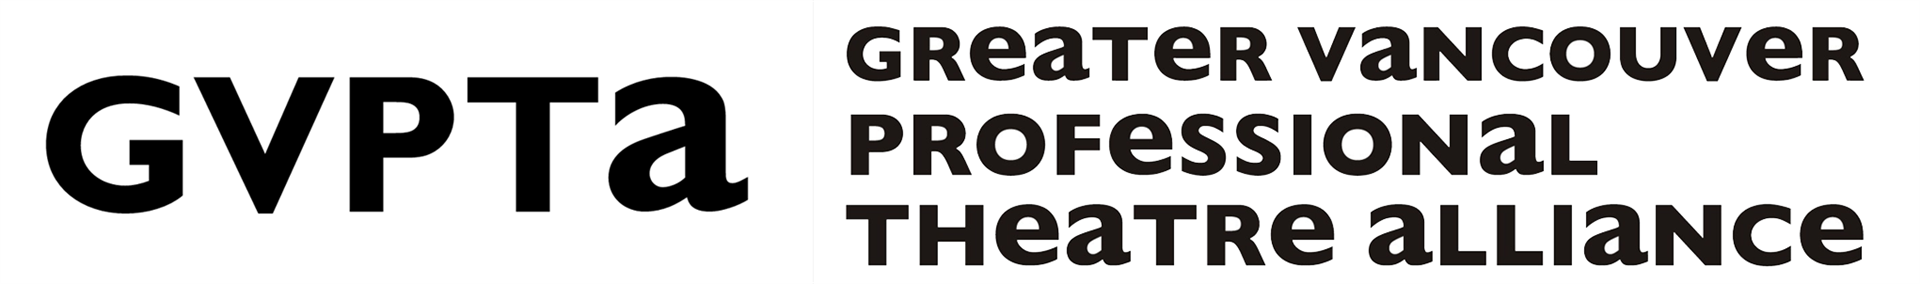 Greater Vancouver Professional Theatre Alliance